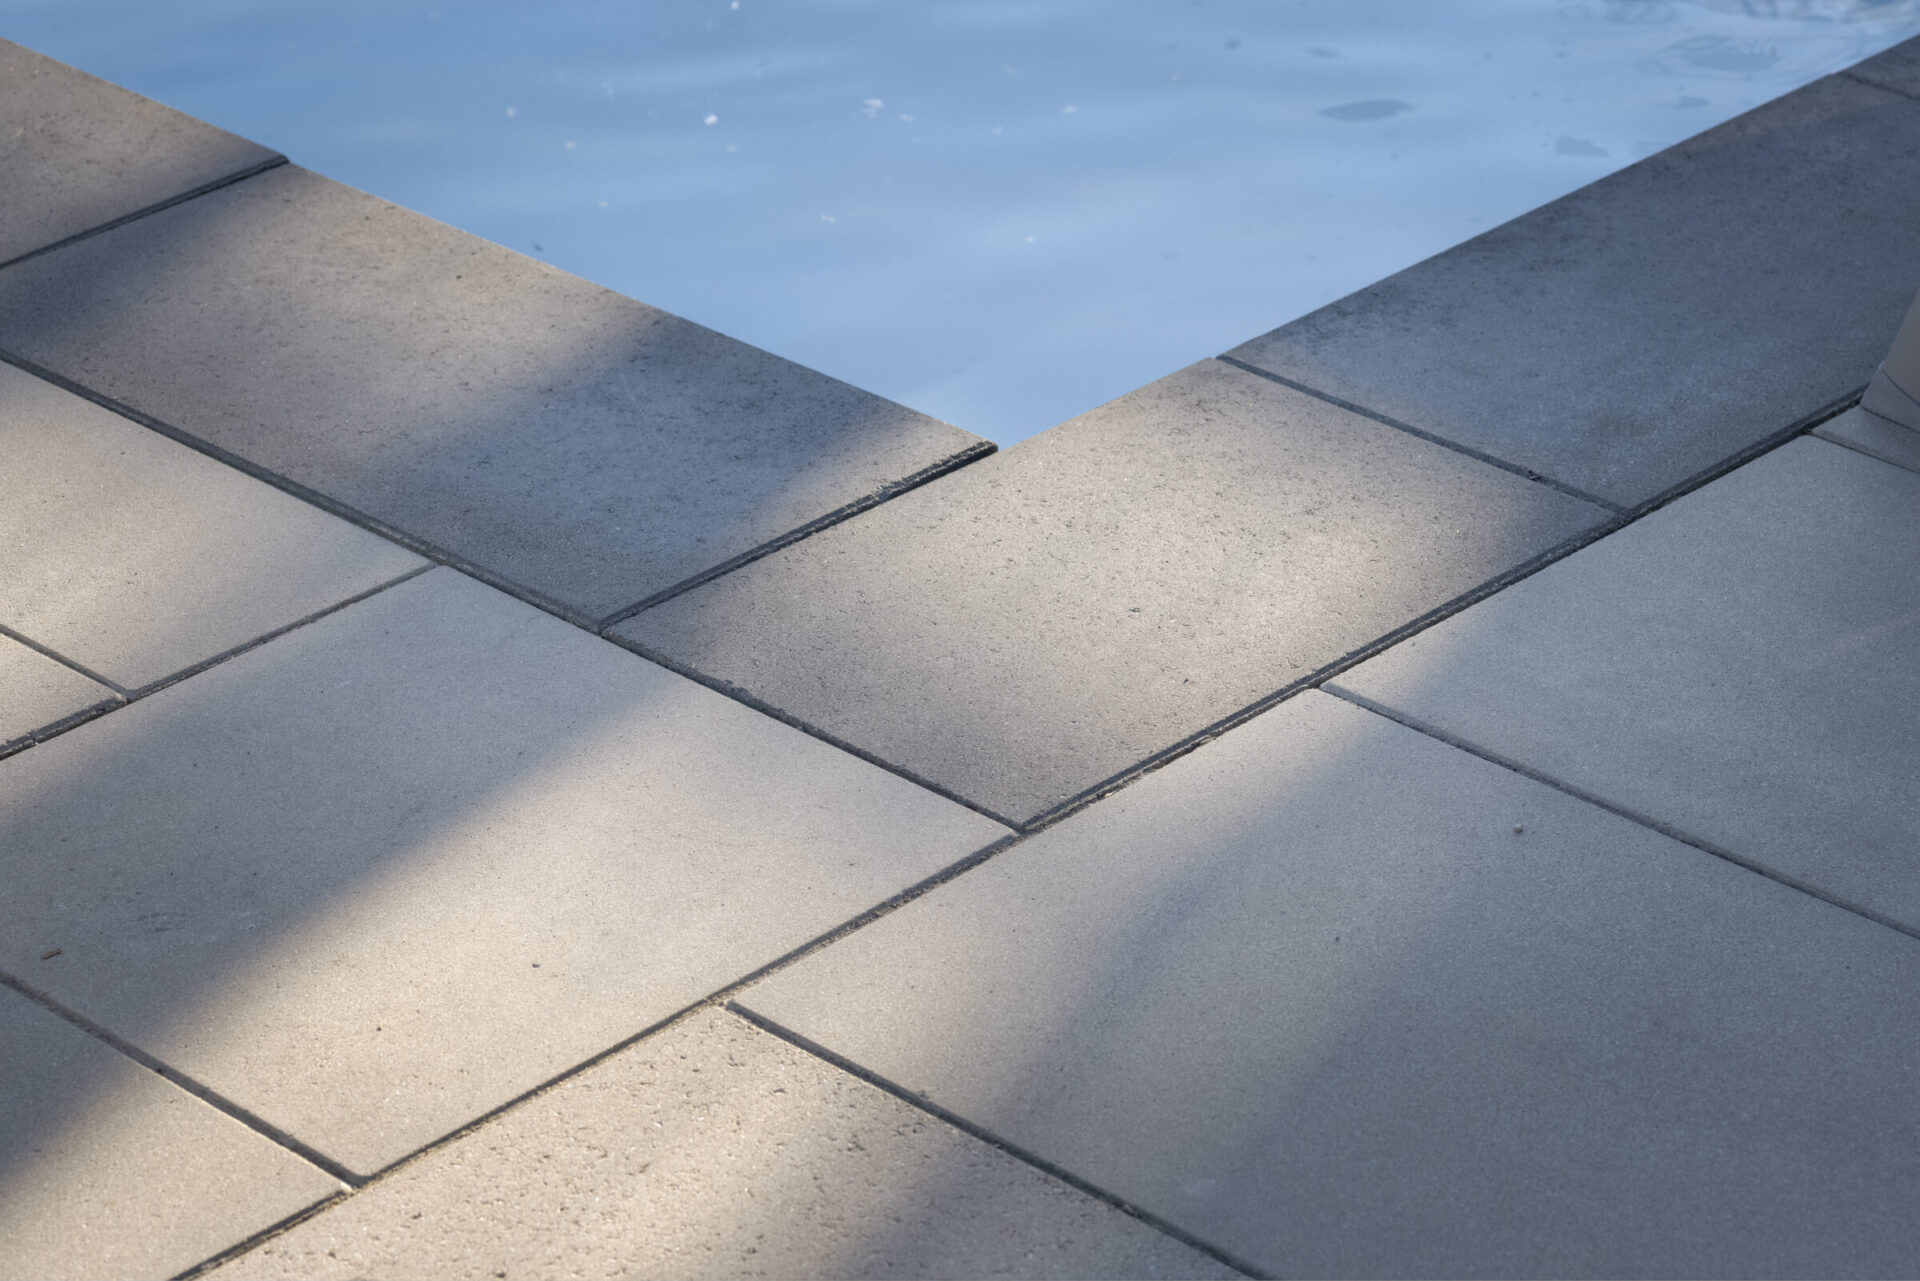 This image shows an edge where tiled flooring meets the calm water of a pool, casting shadows and reflecting the sky above.